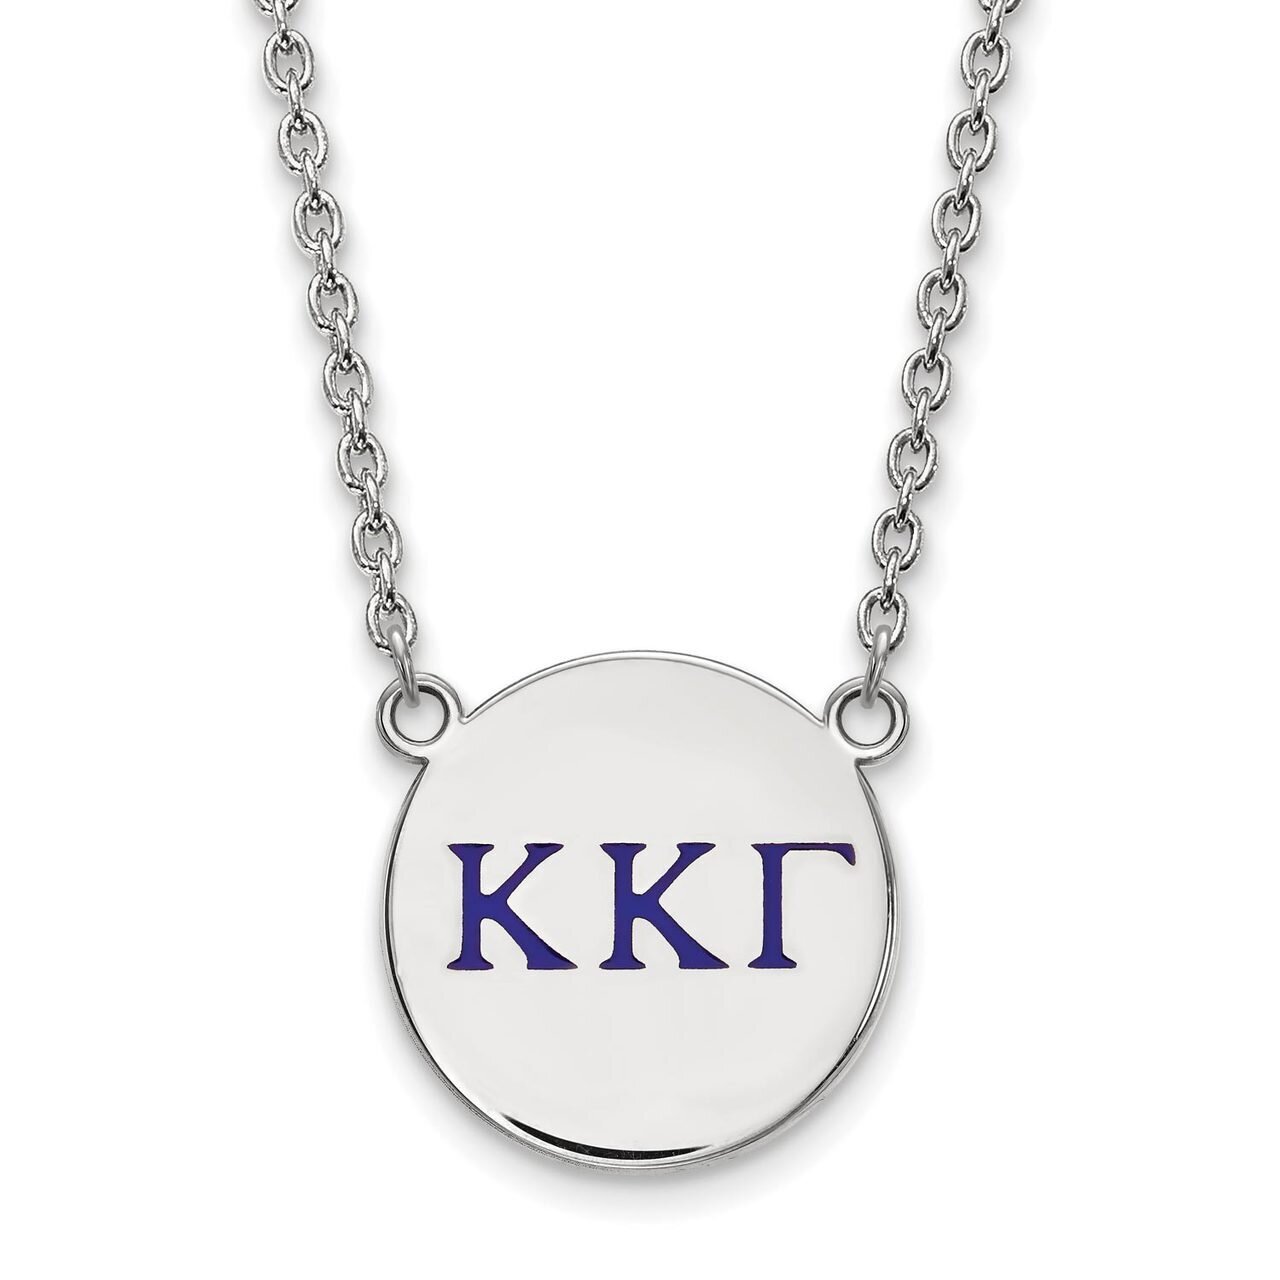 Kappa Kappa Gamma Small Enameled Pendant with 18 Inch Chain Sterling Silver SS028KKG-18